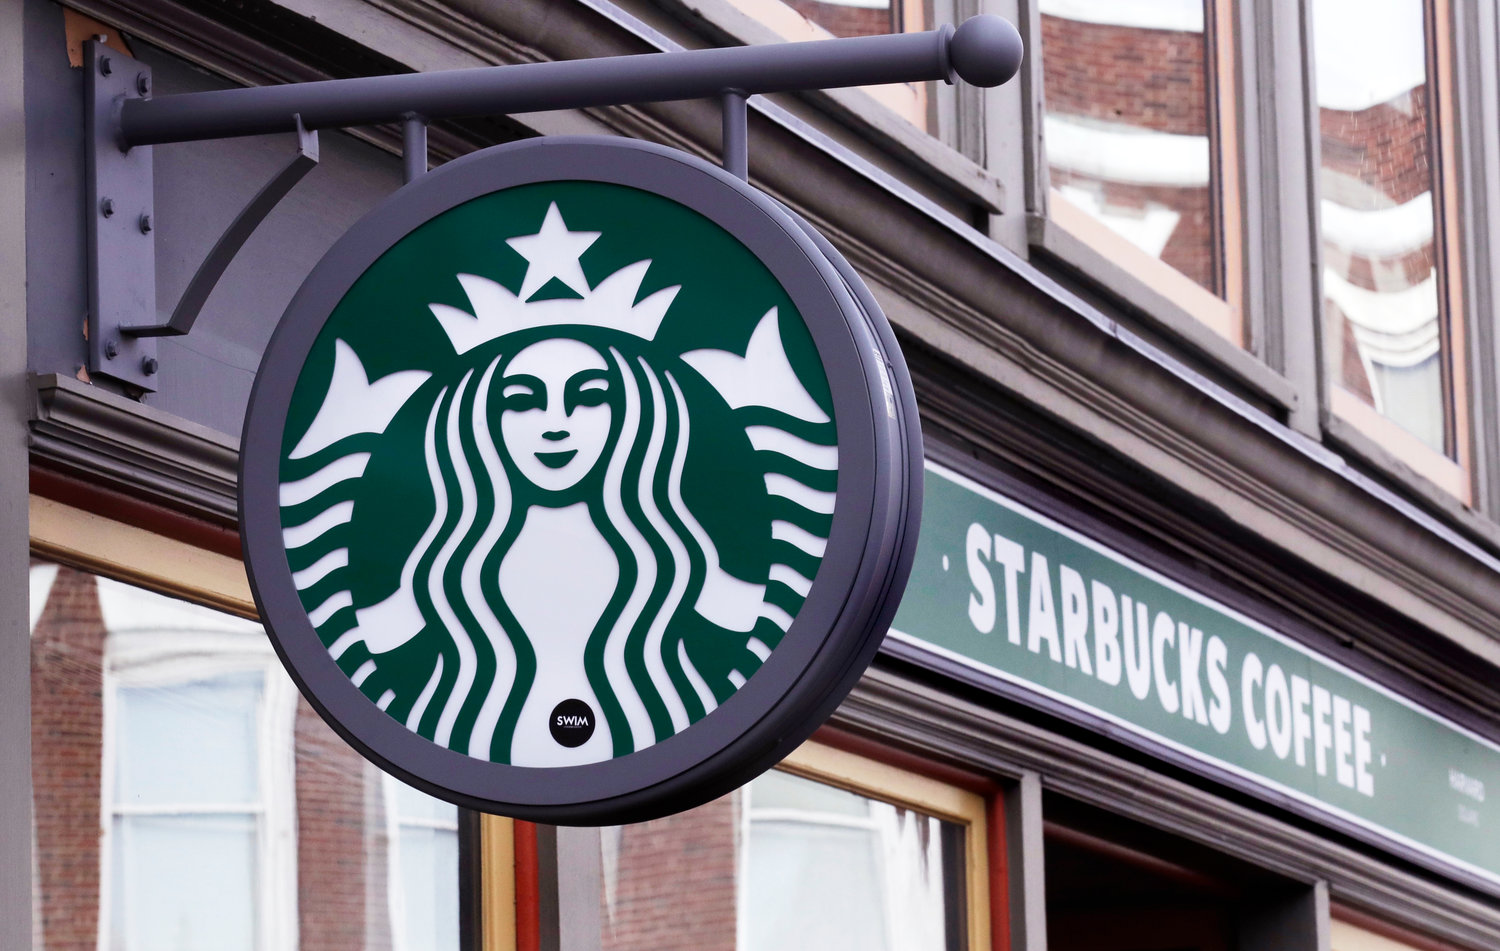 A sign for a Starbucks Coffee shop is pictured in Harvard Square in Cambridge, Mass., Dec. 13, 2018. The Seattle-based coffee giant said its revenue rose 9% to $8.2 billion during the April-June 2022 period, a quarterly record. That surpassed Wall Street’s forecast of $8.1 billion, according to analysts polled by FactSet.